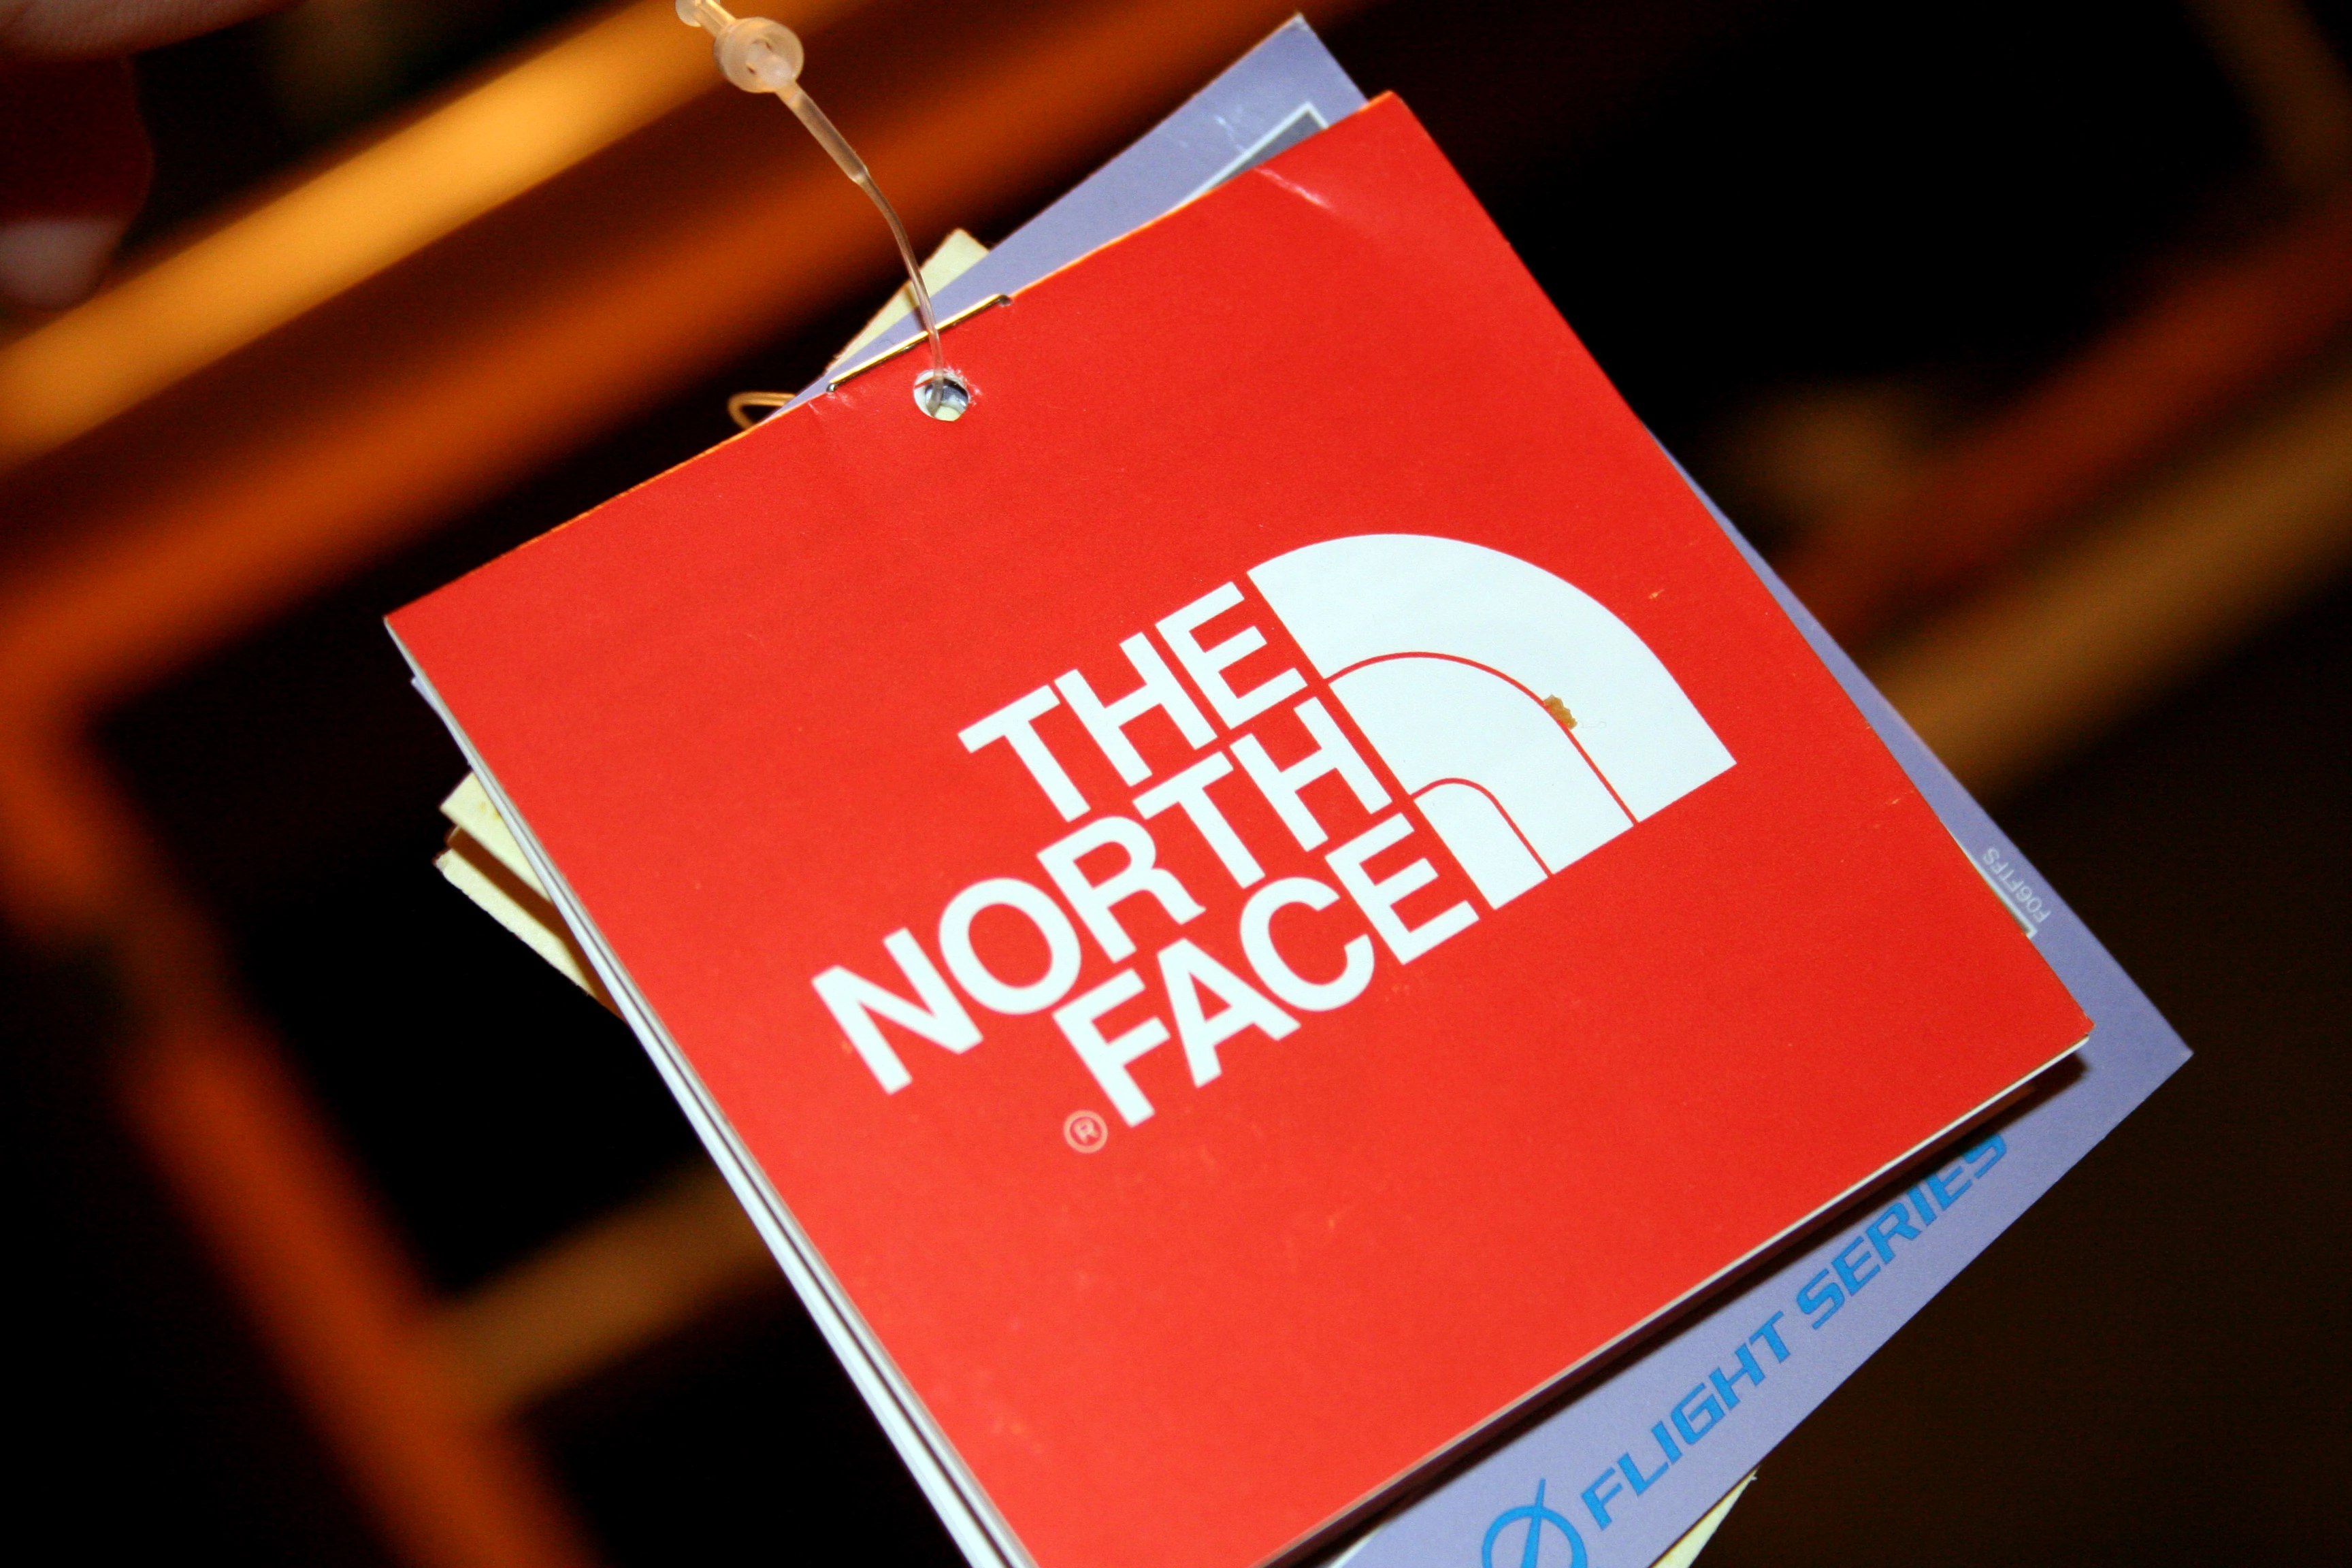 The North Face are operating a new venue at intu Lakeside.